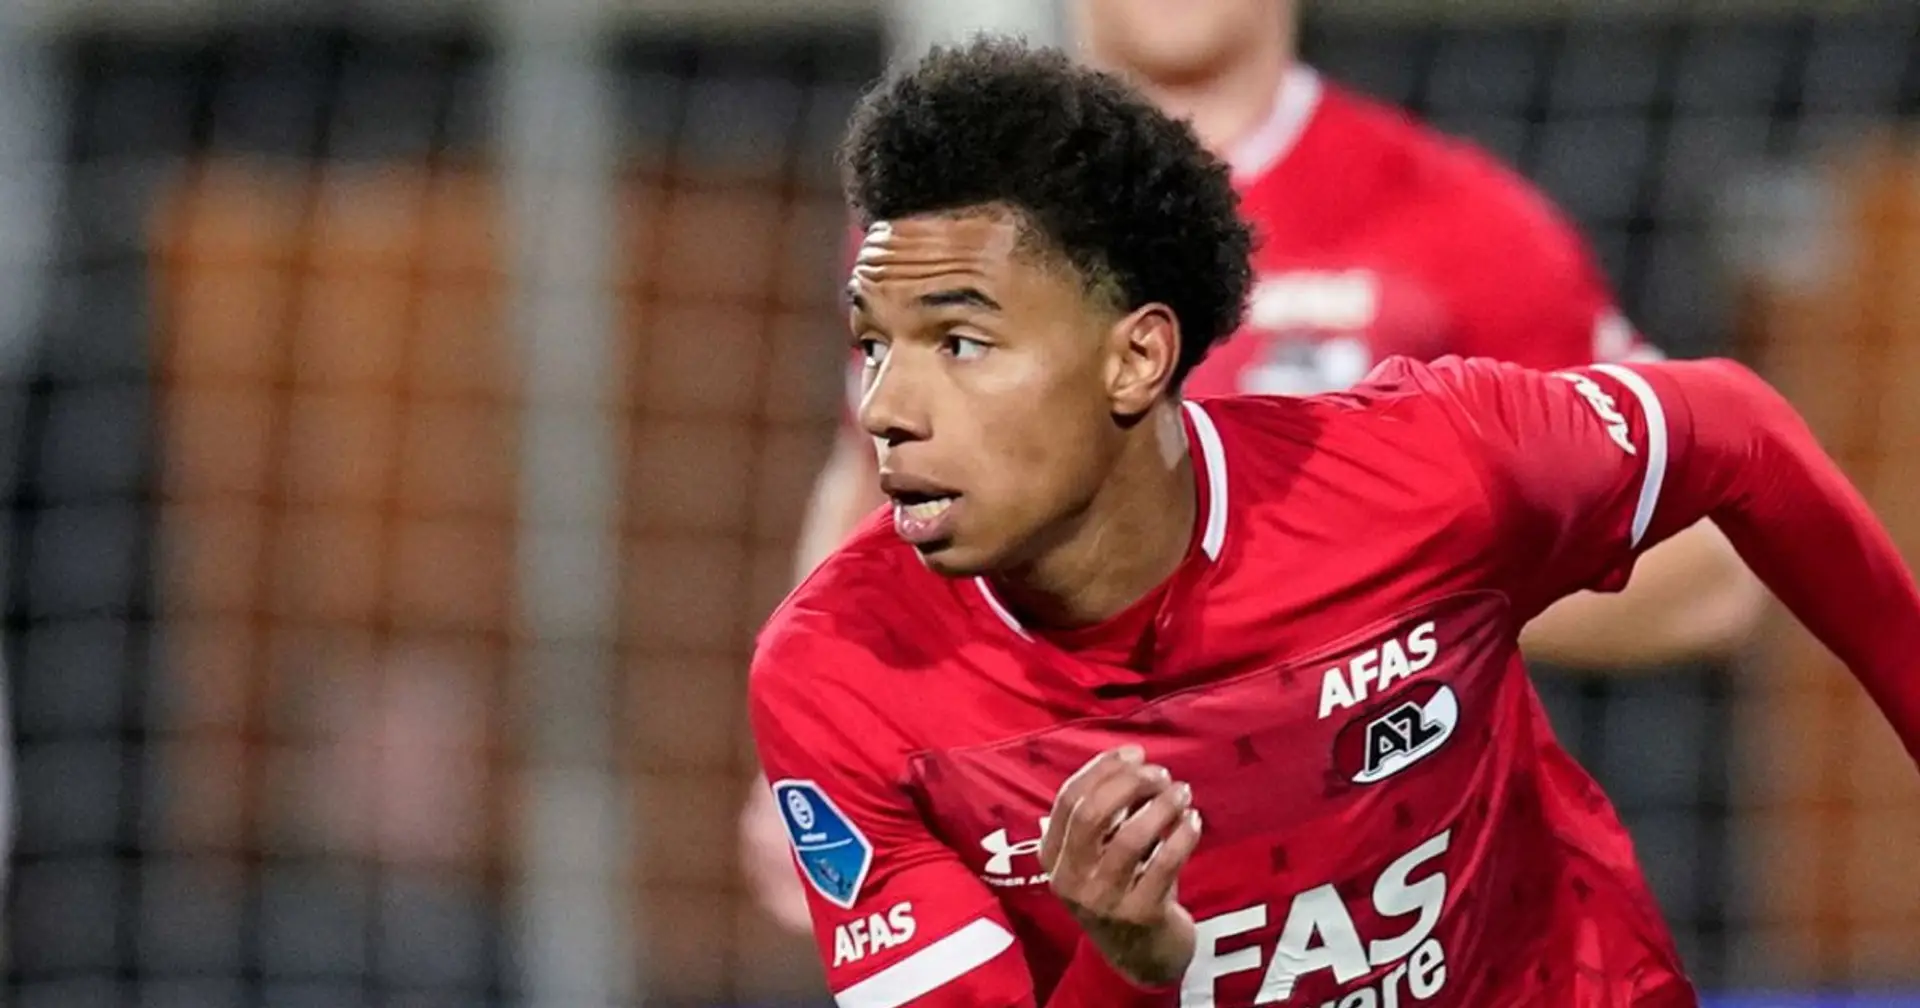 Barcelona said to be interested in AZ's promising winger Calvin Stengs